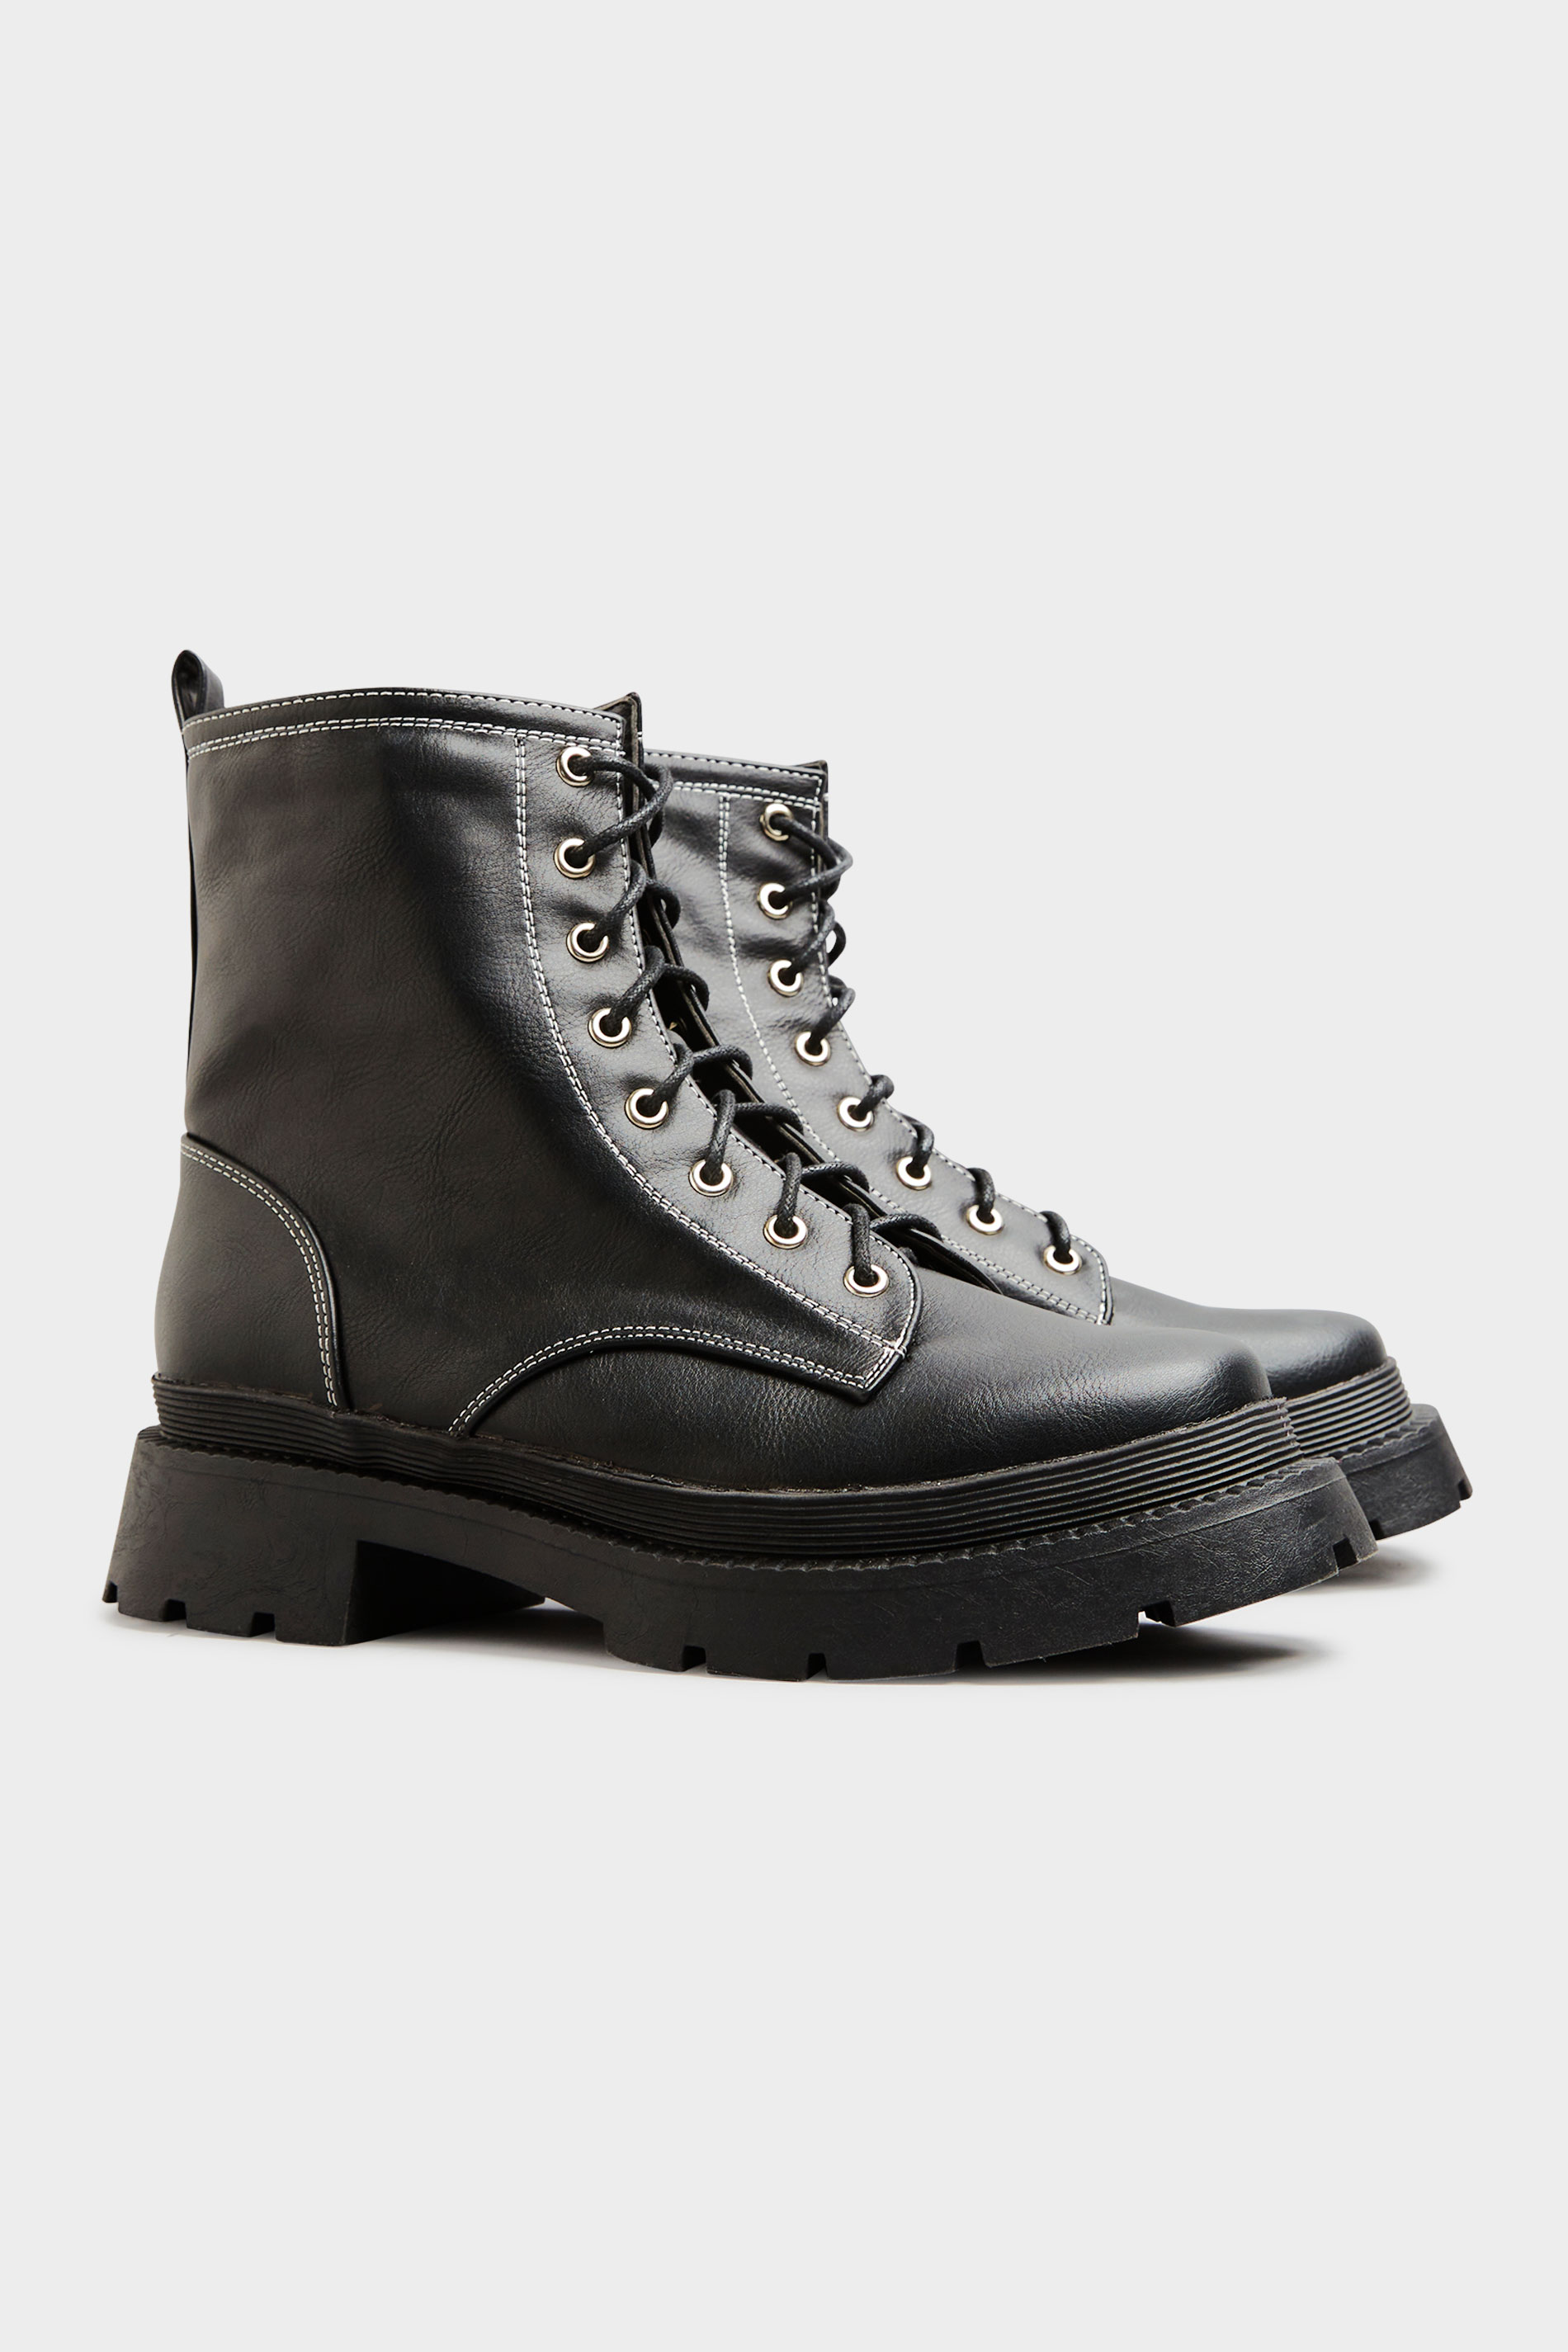 LIMITED COLLECTION Black Contrast Stitch Chunky Boots In Extra Wide EEE Fit_C.jpg